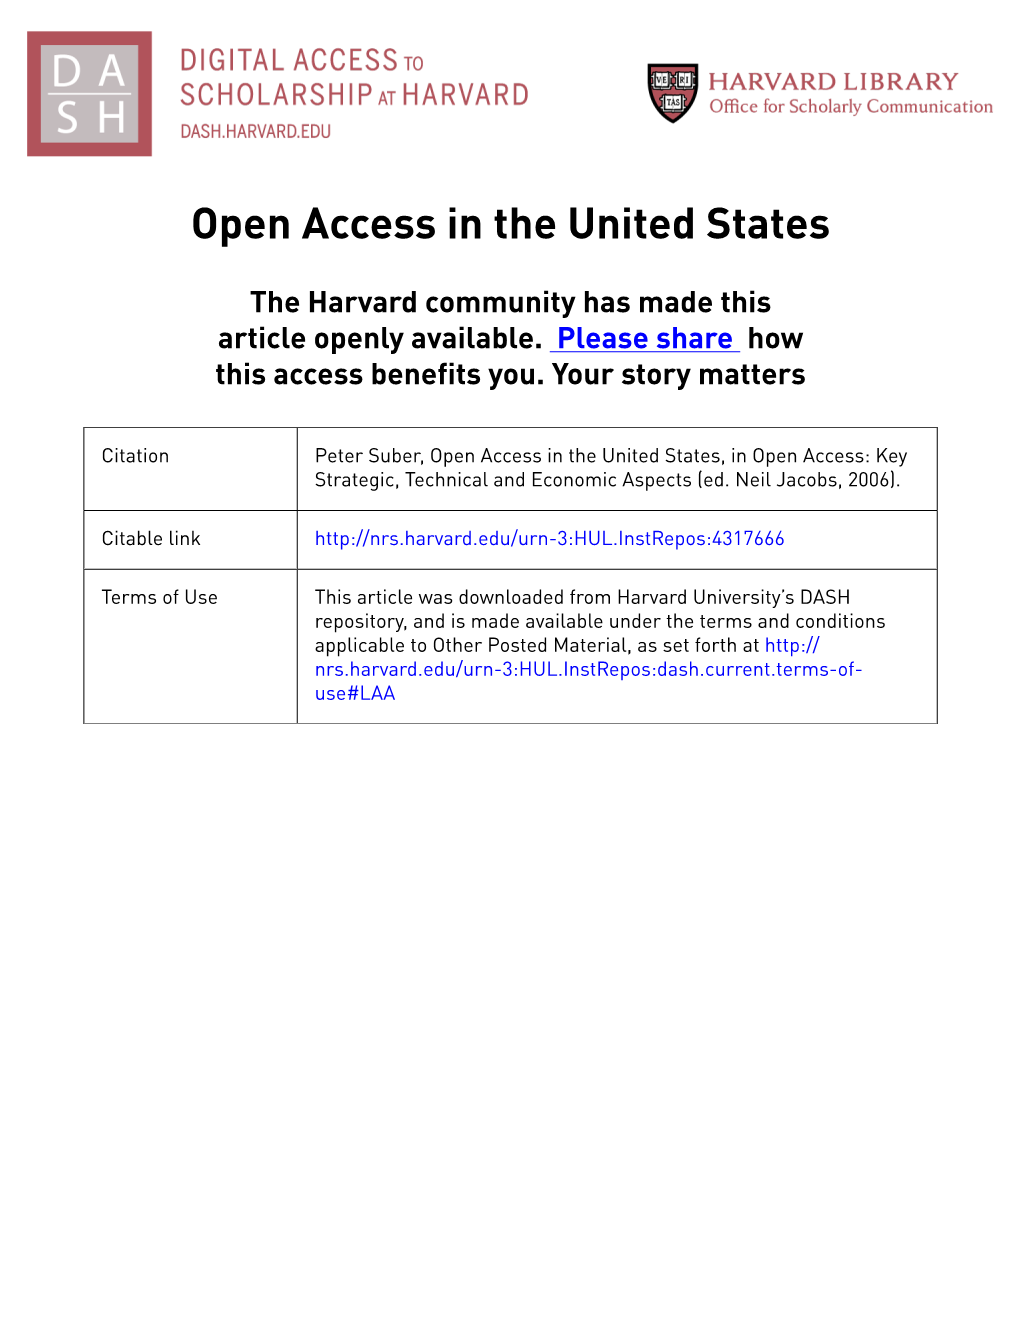 Open Access in the United States